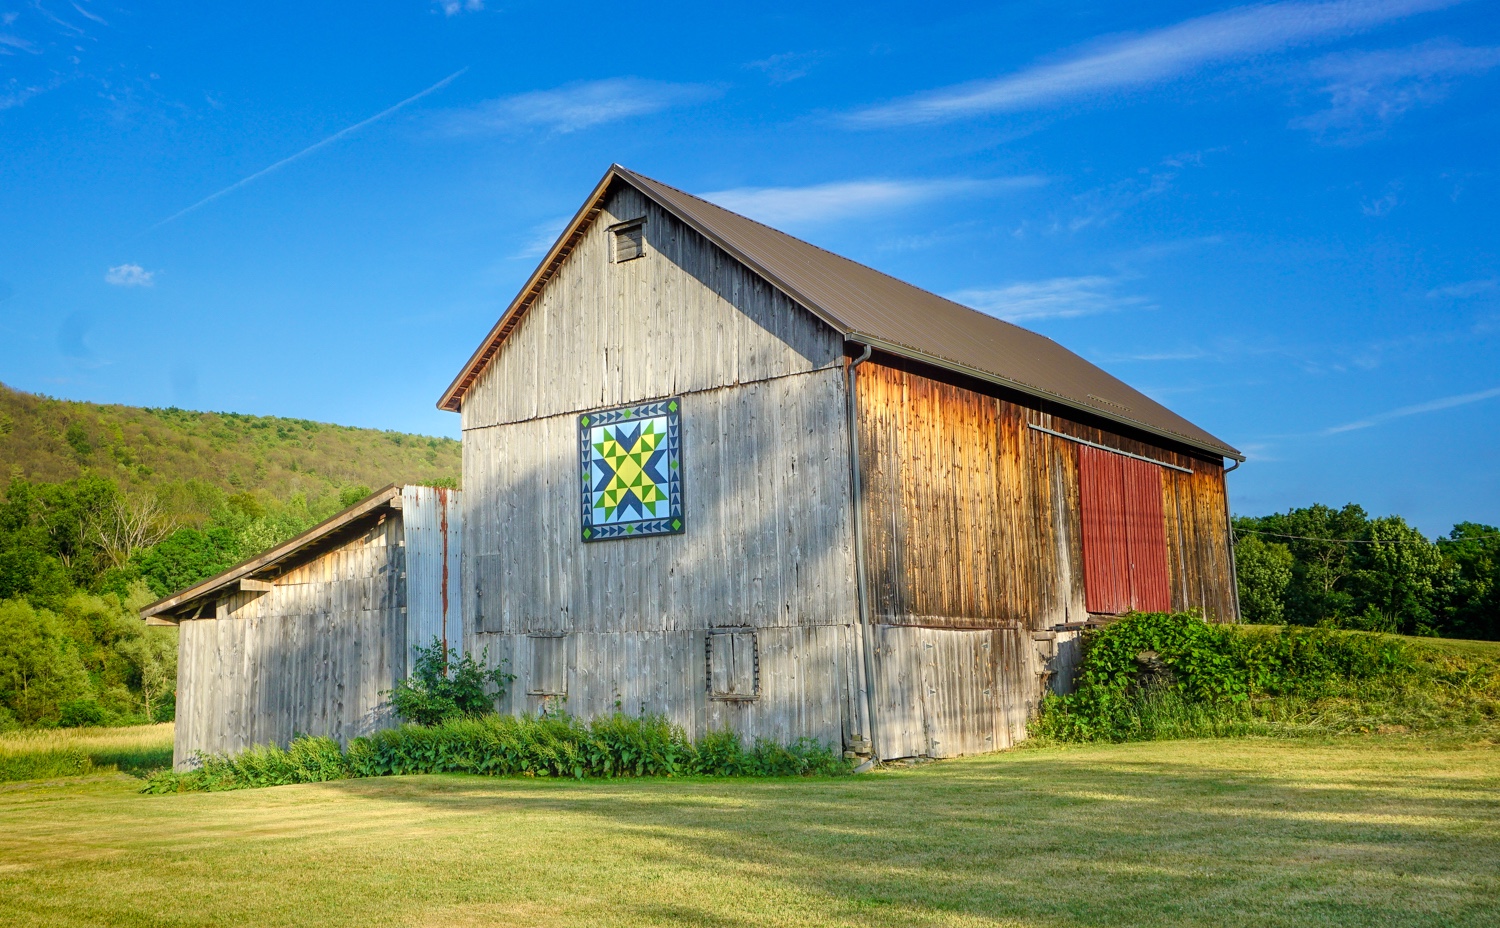 Barn Quilts in Upstate New York - Featured Image